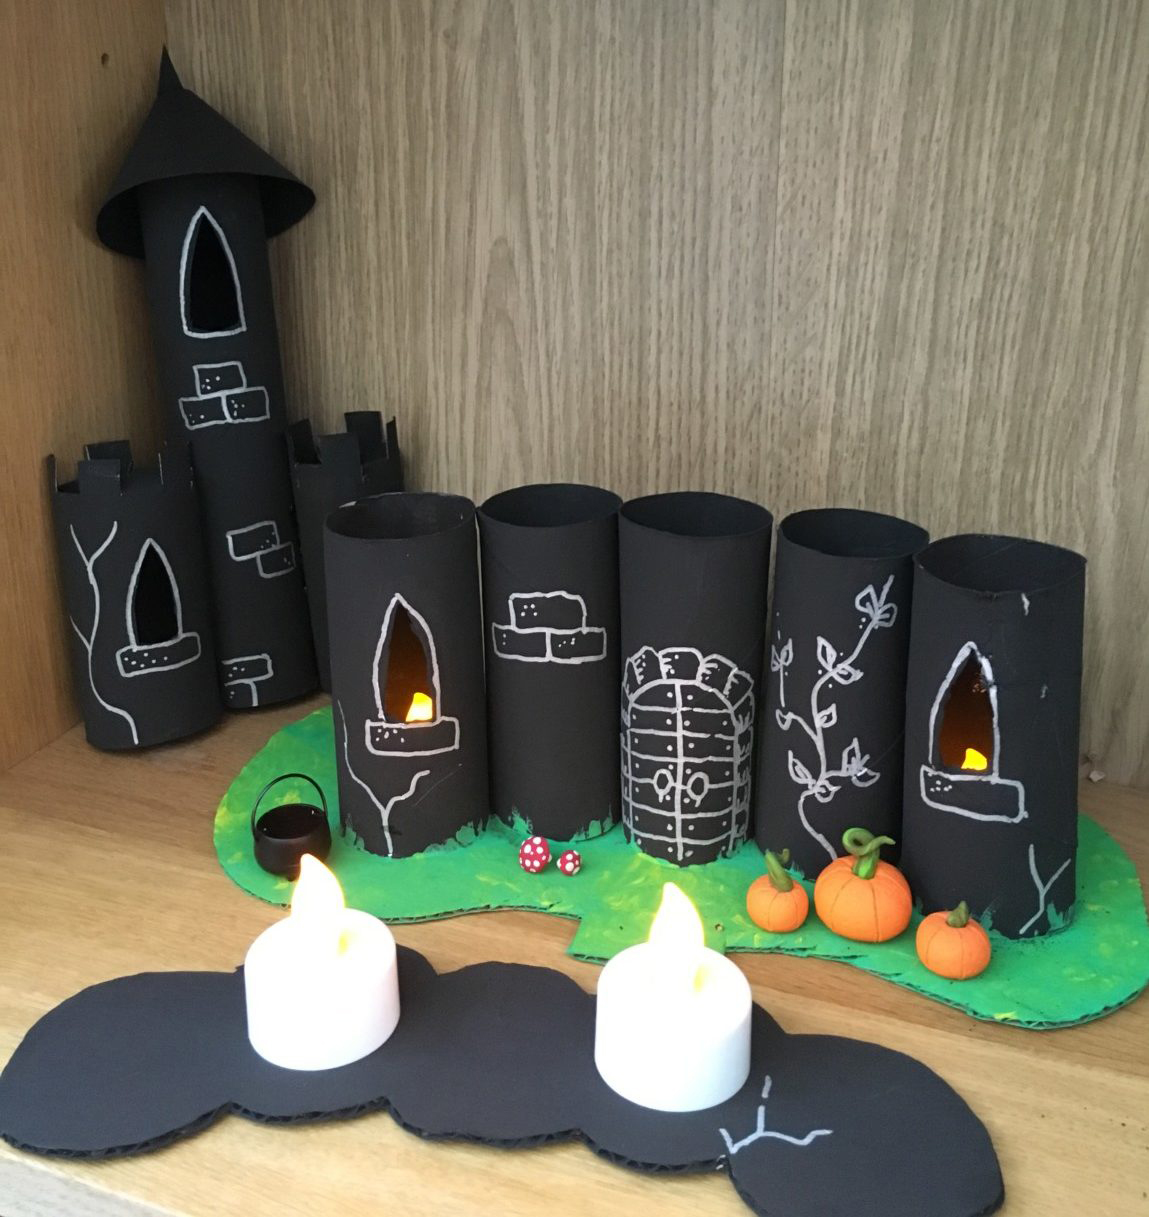 Halloween Castle made from toilet roll tubes